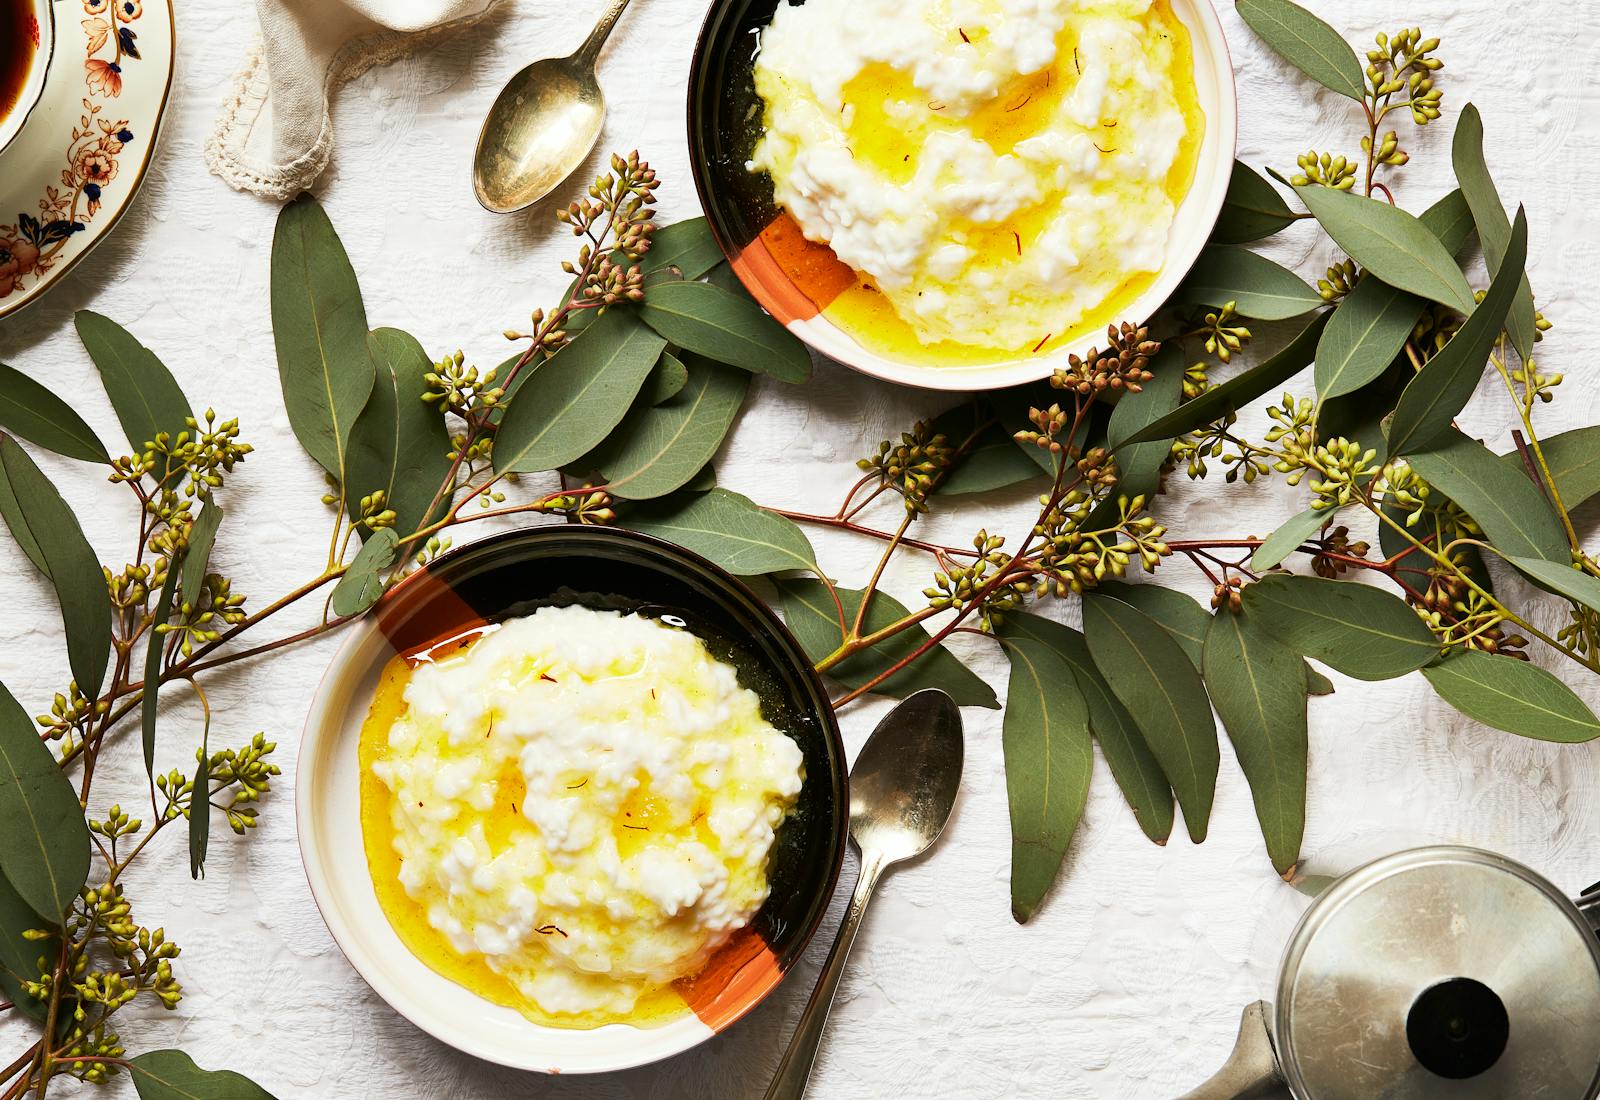 Bowls of rice pudding with saffron syrup.